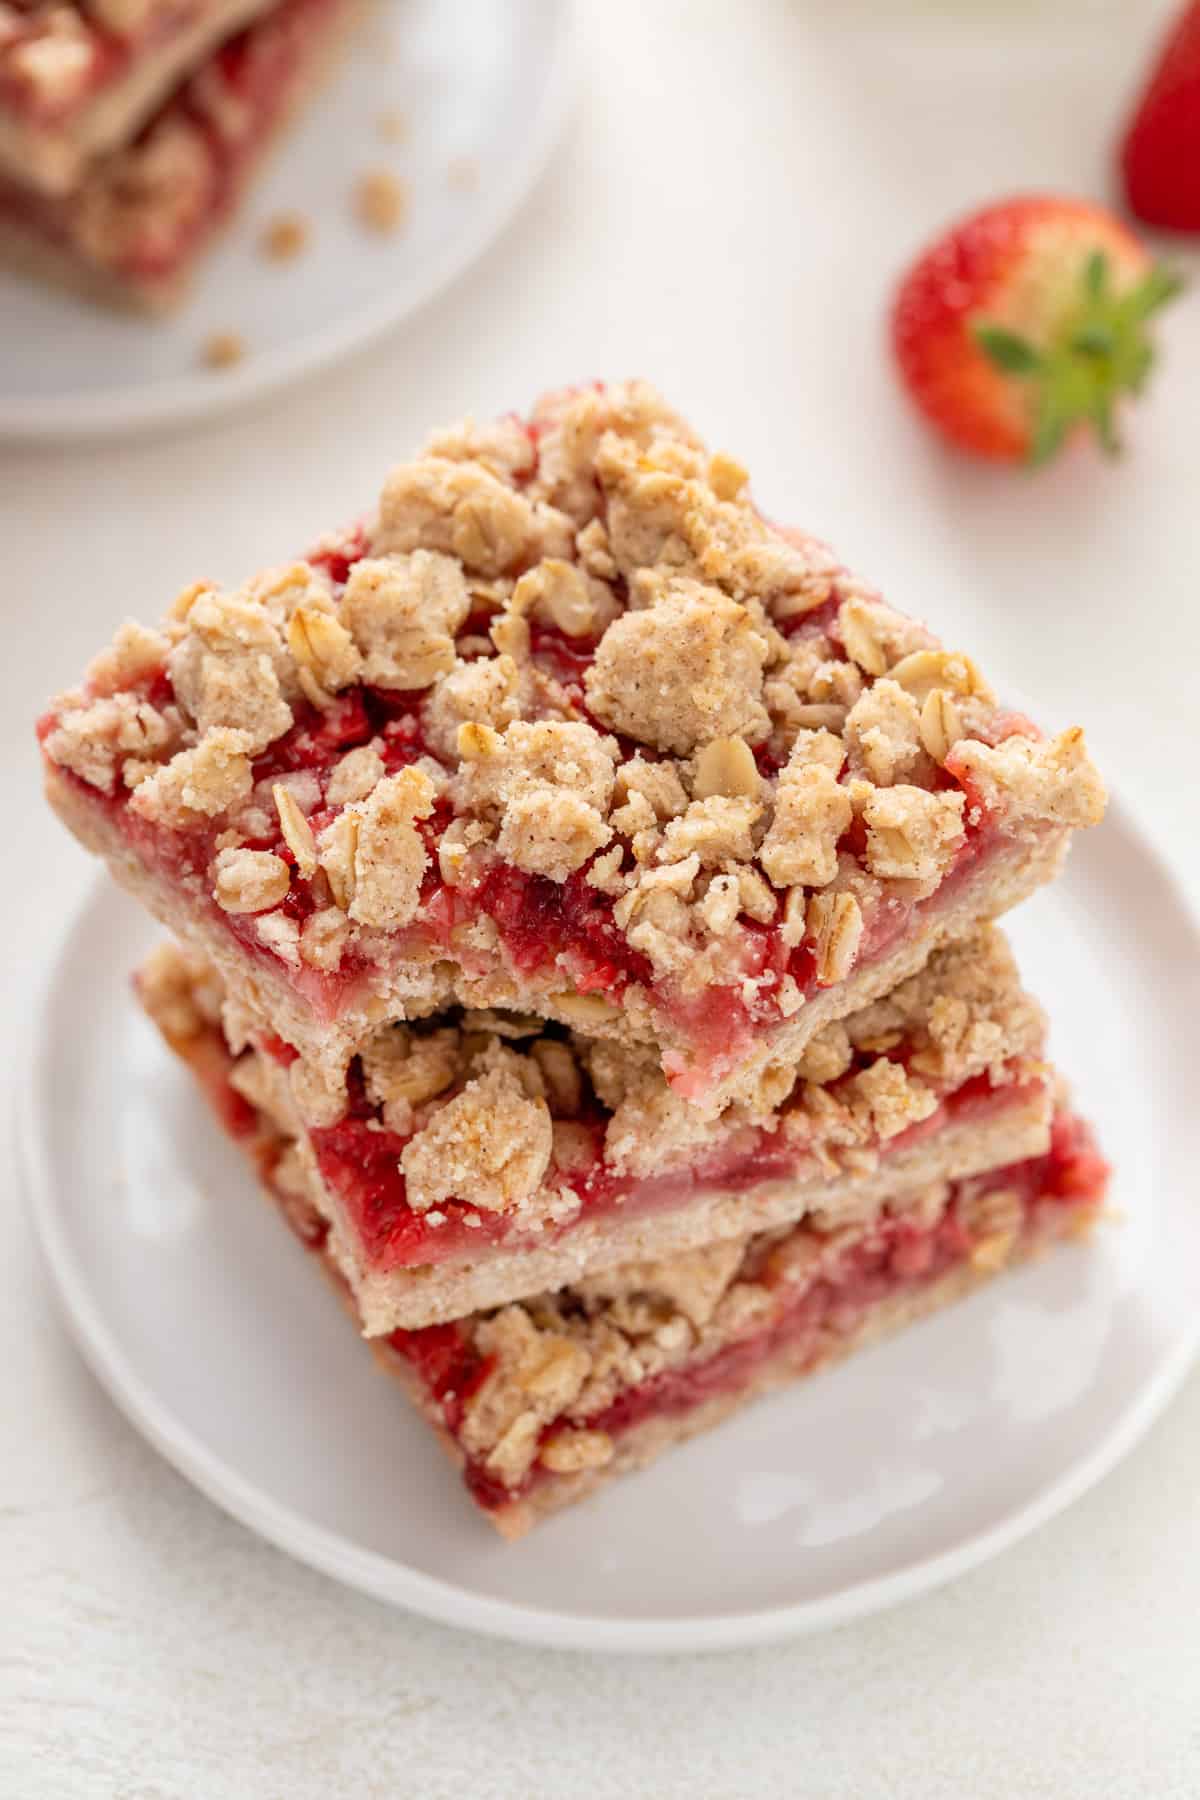 Three strawberry oatmeal bars stacked on a plate with a bite taken from a corner of the top bar.